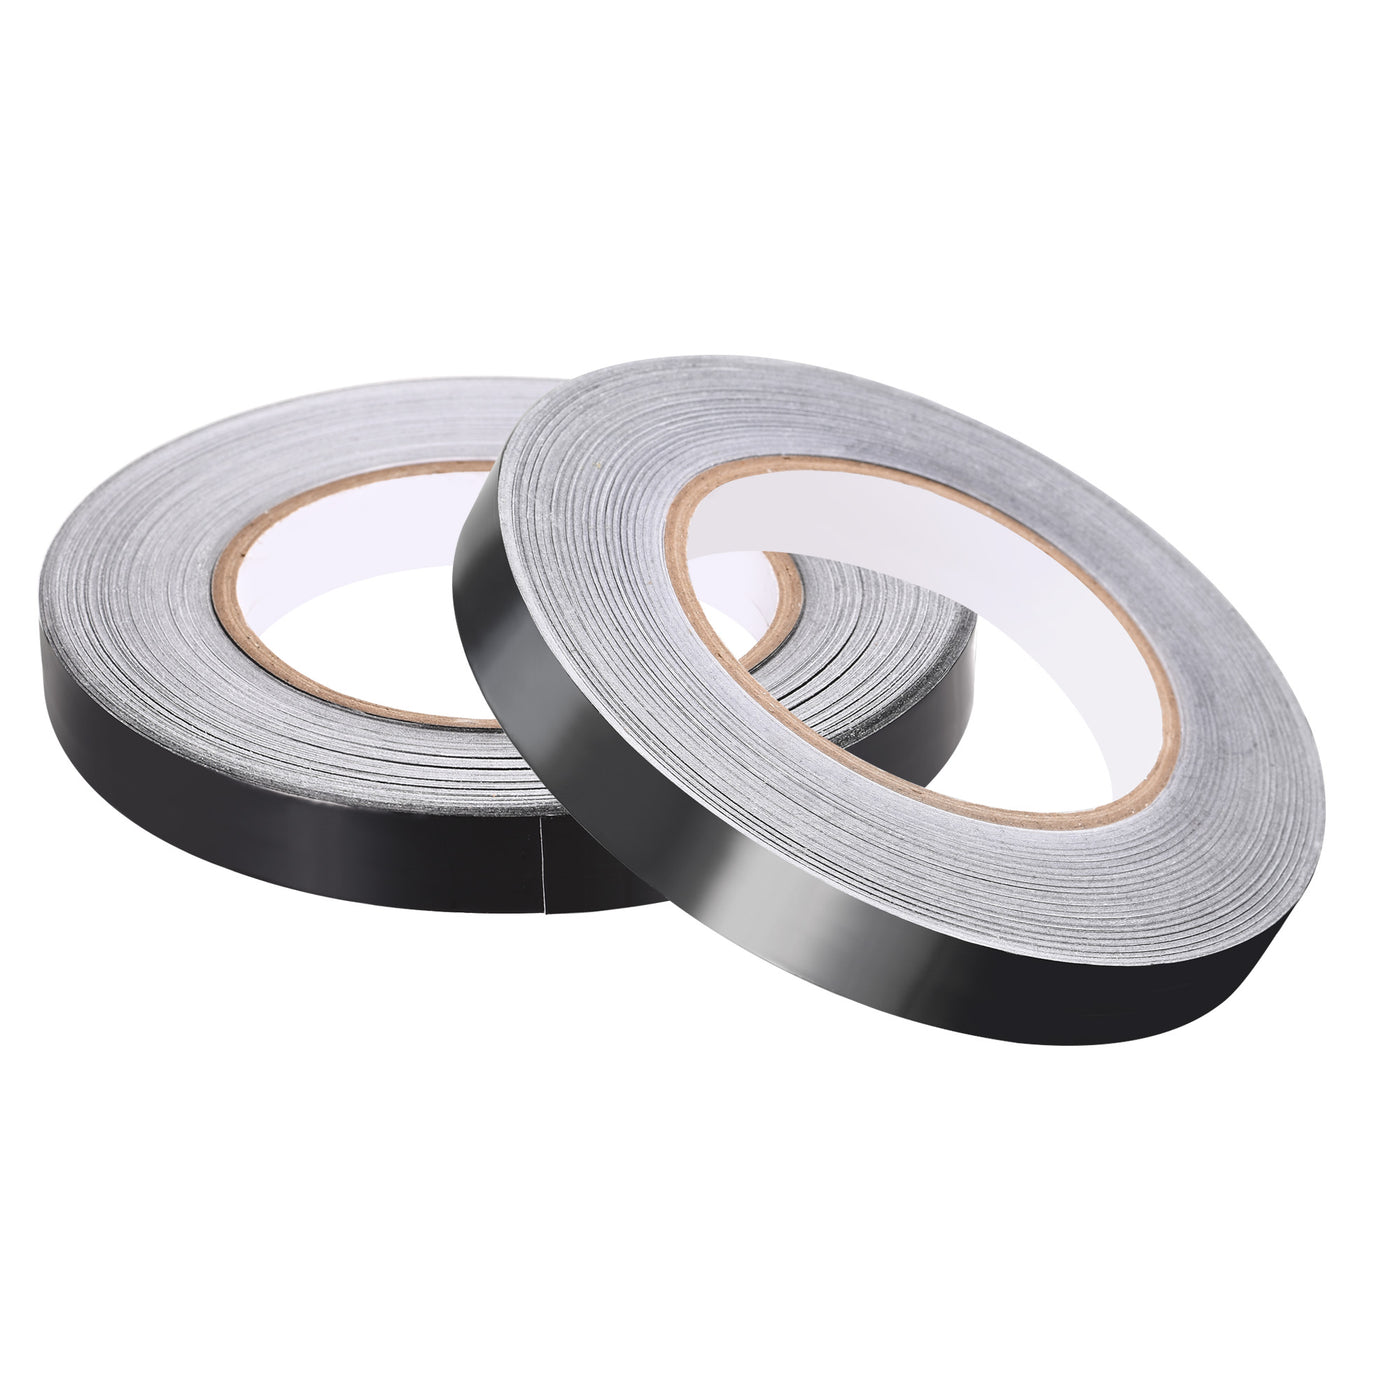 uxcell Uxcell 15mm Aluminum Foil Tape for HVAC, Patching Hot and Blocking light 50m/164ft 2pcs